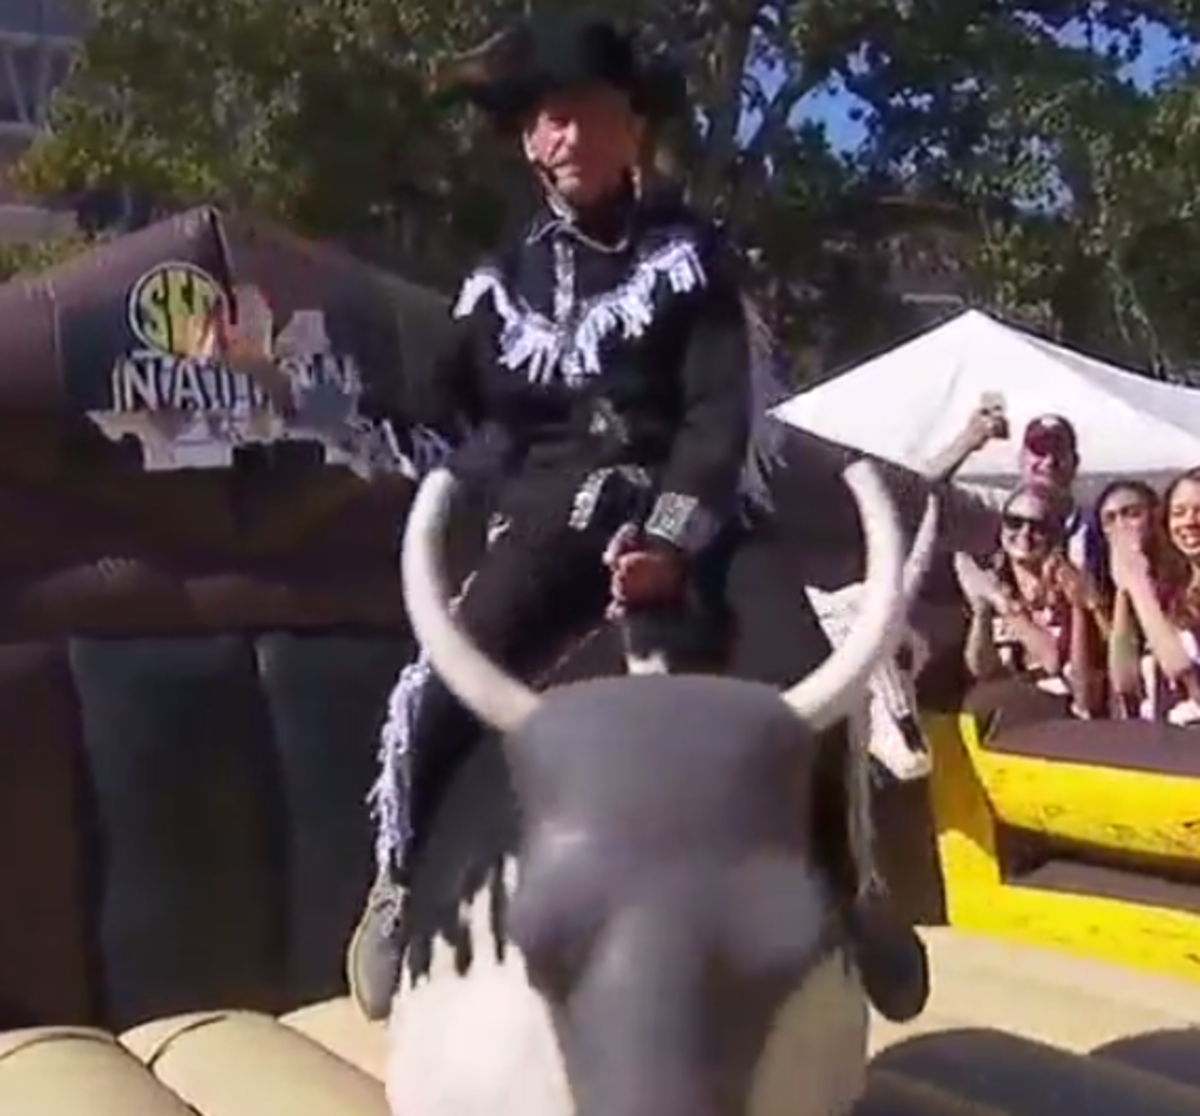 amelia schlebusch recommends Mechanical Bull Riding Videos